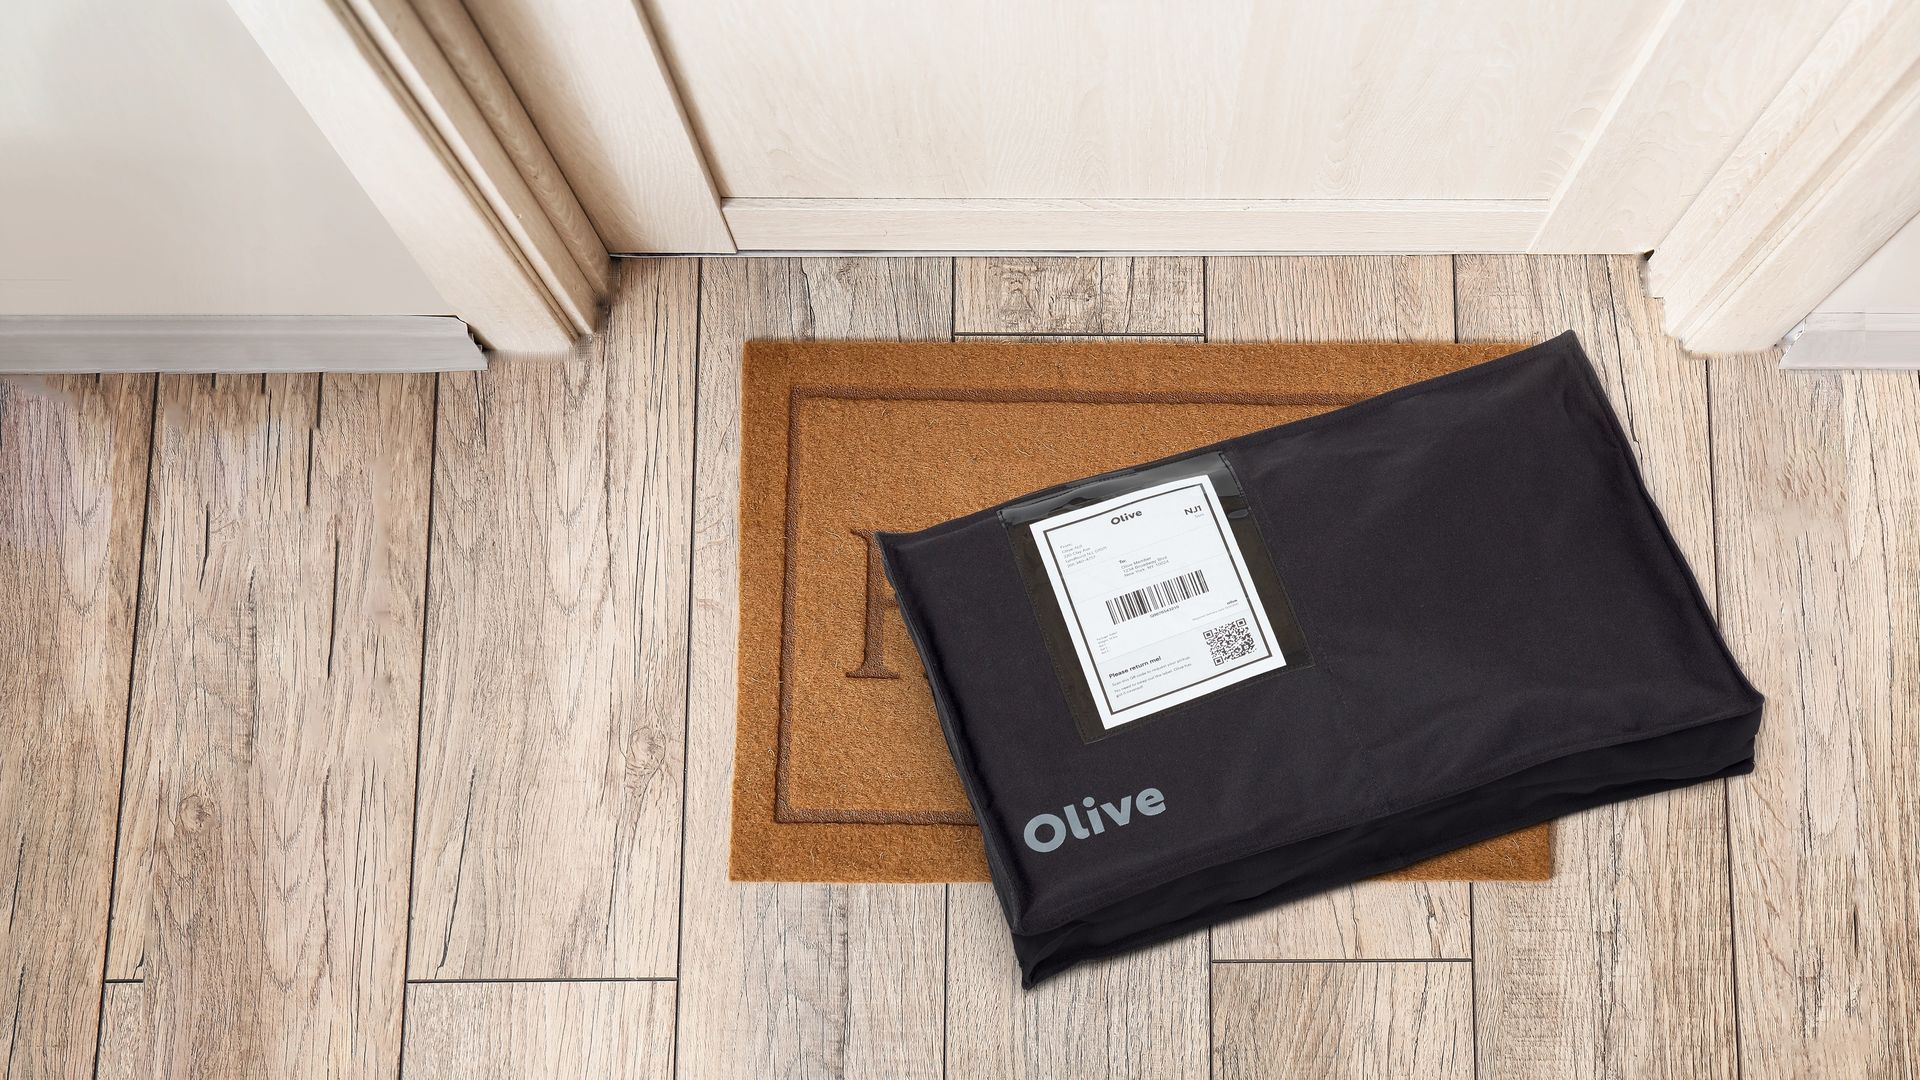 A picture of an Olive-packed package on a doorstep